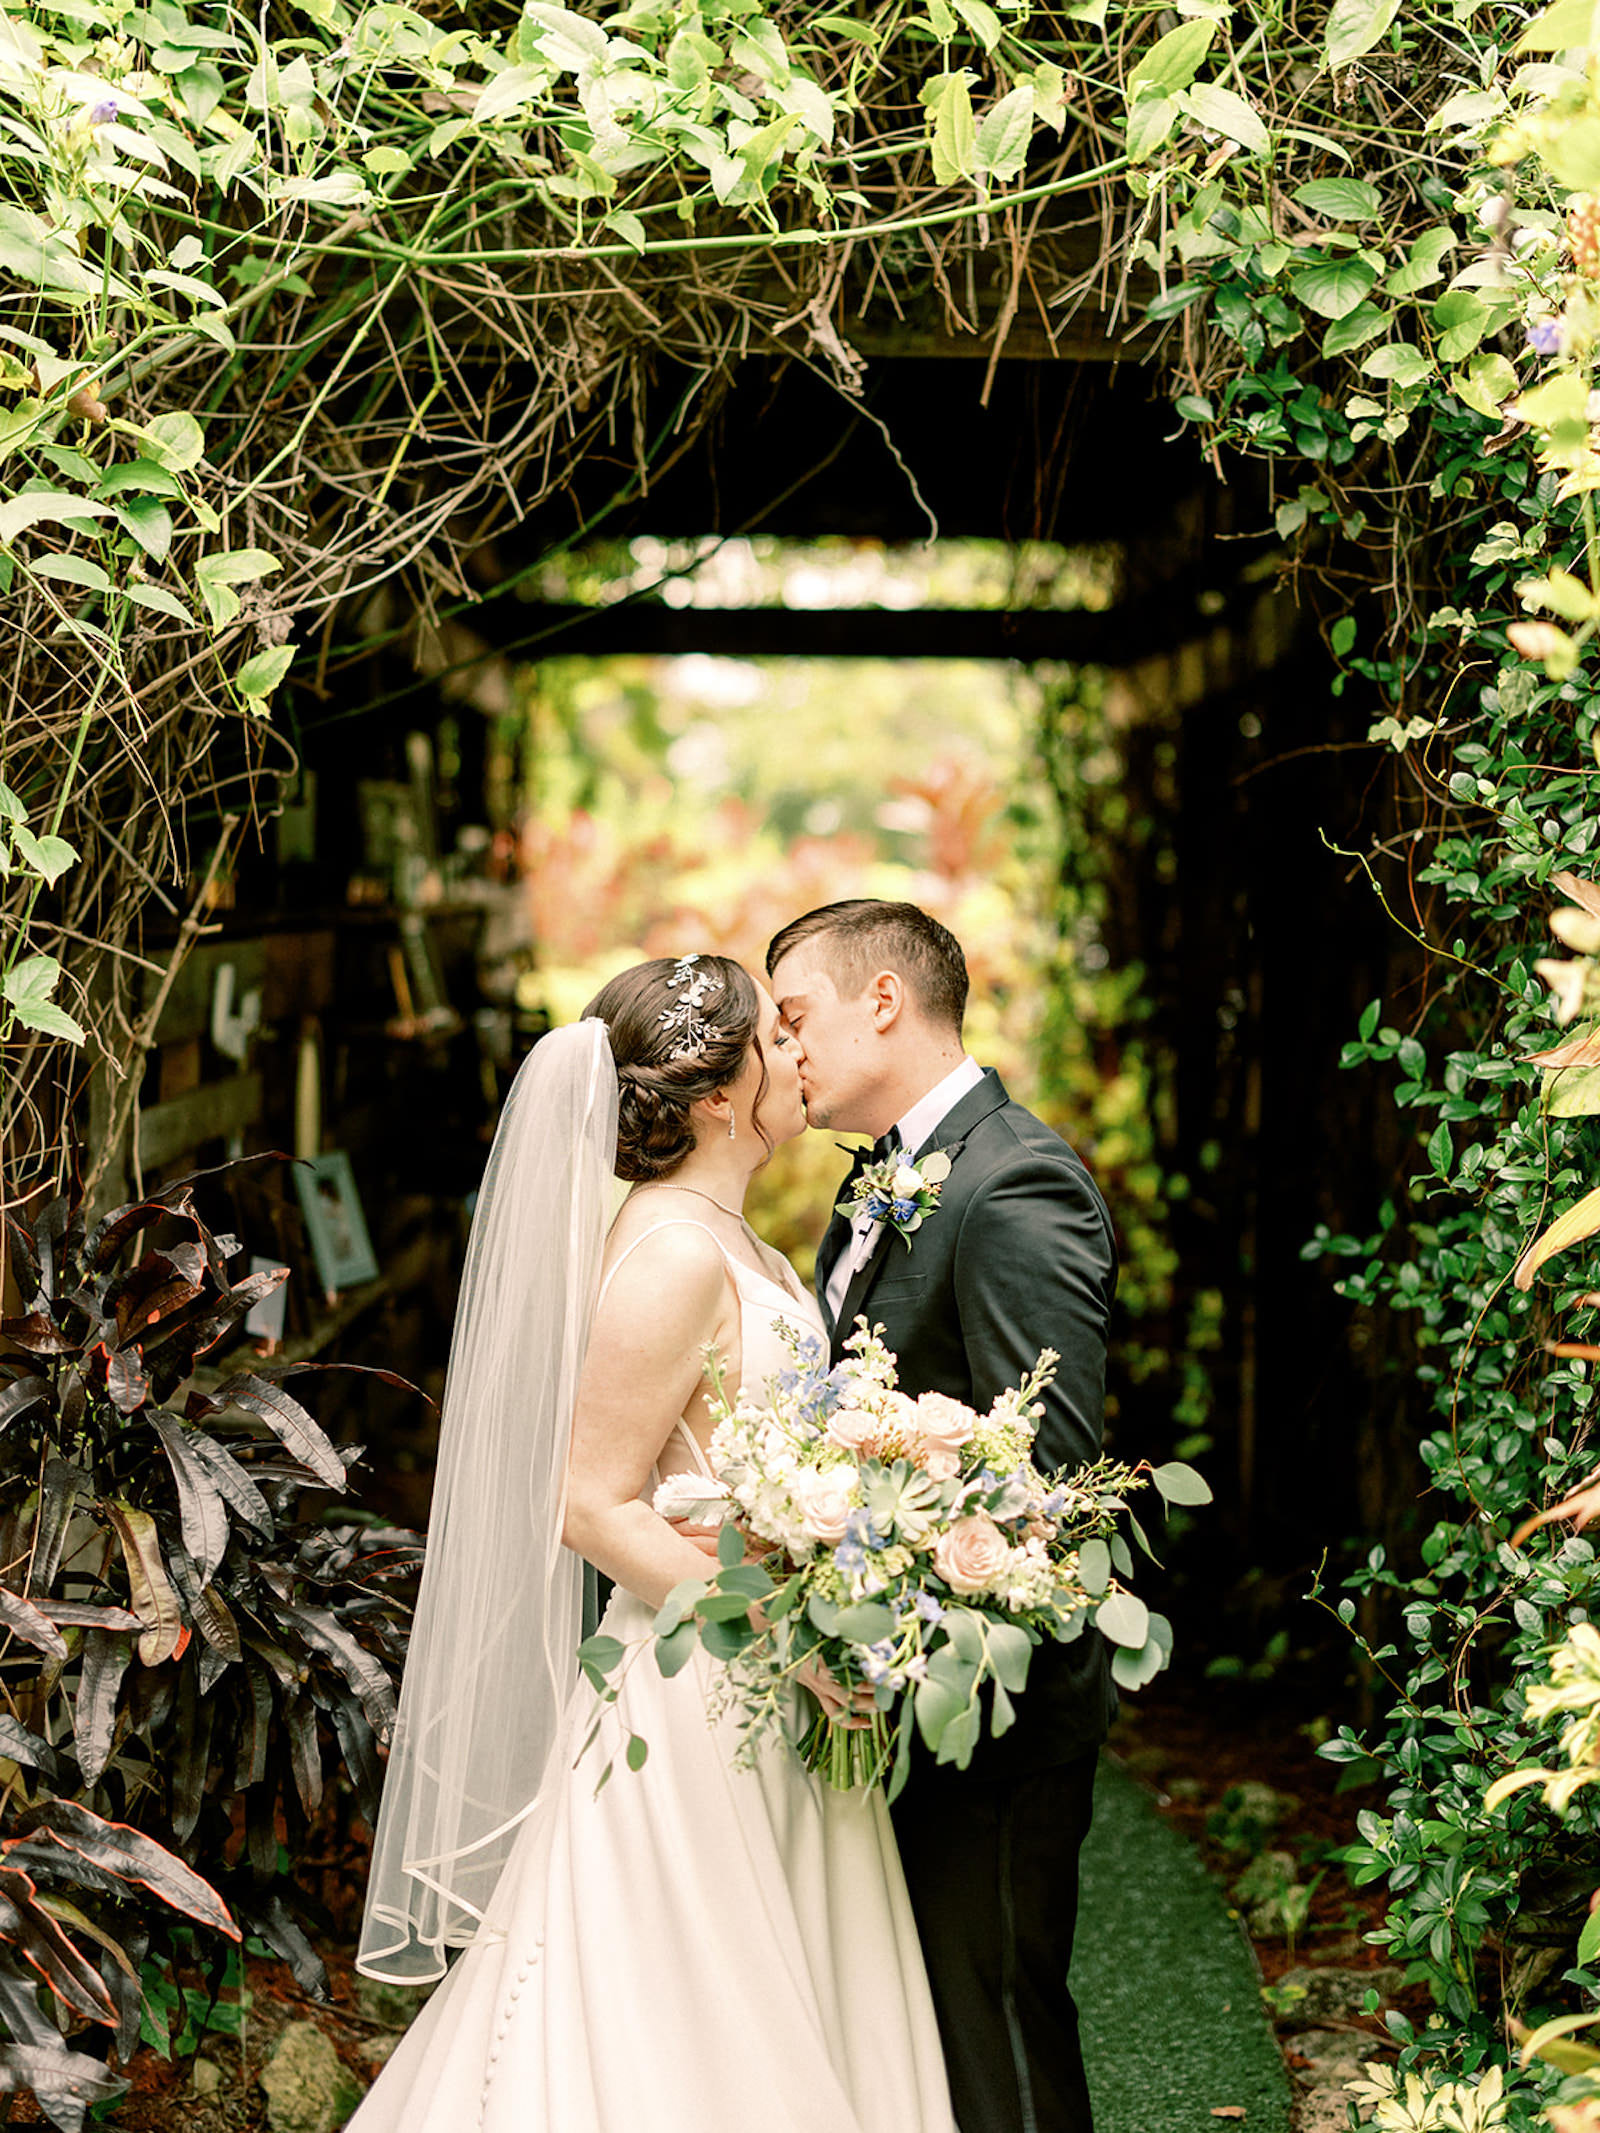 Bride and Groom in Vine Tunnel Romantic Wedding Portrait | Tampa Bay Videographer Shannon Kelly Films